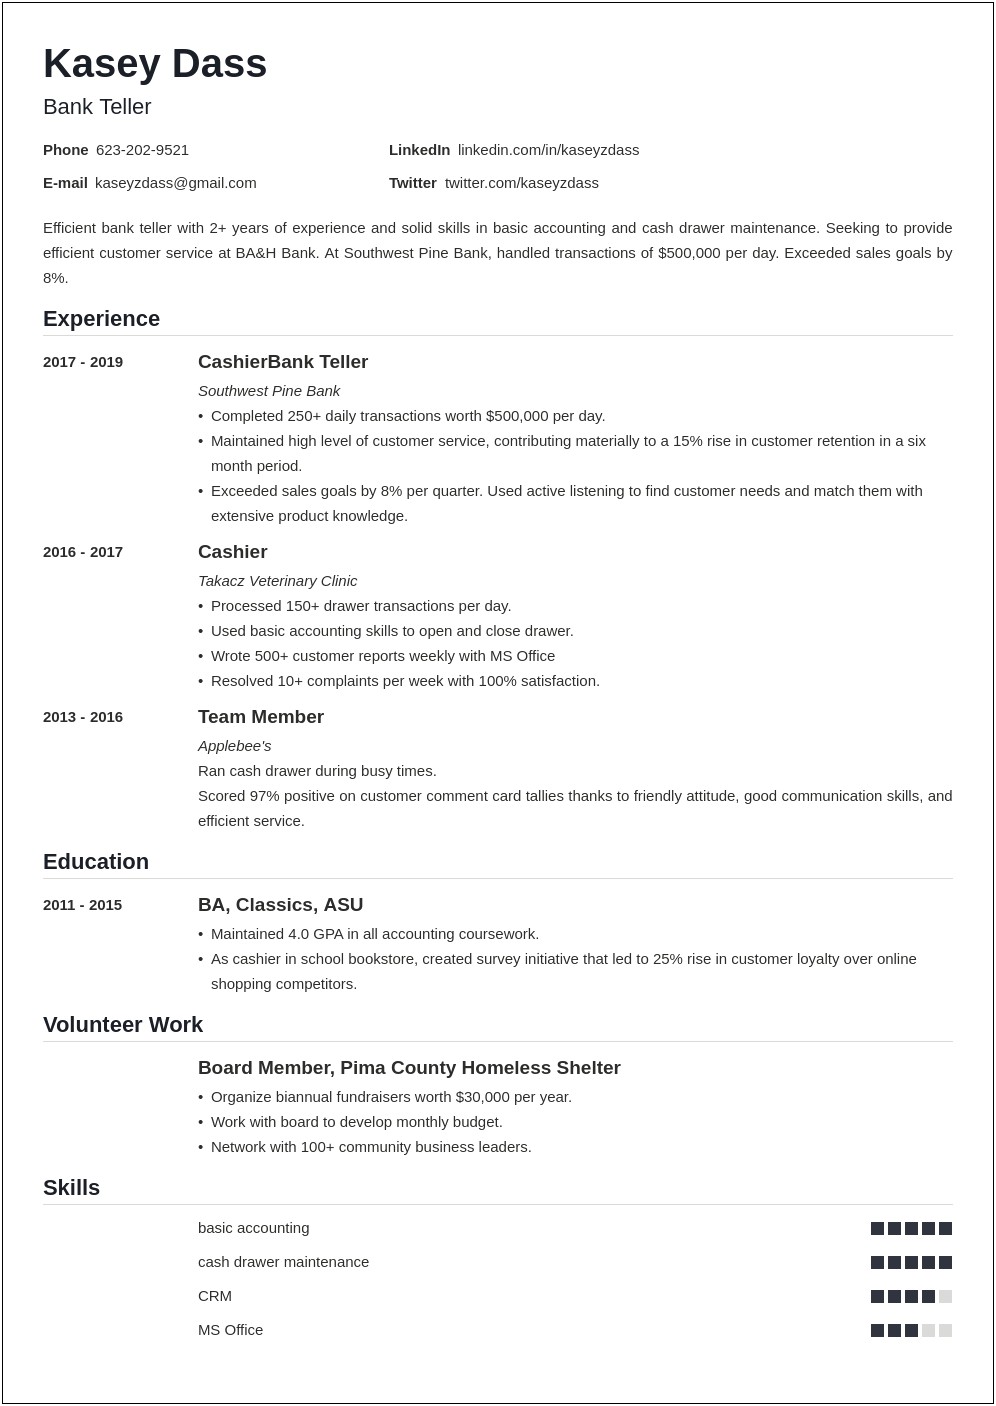 Resume Objective For Fast Food Cashier